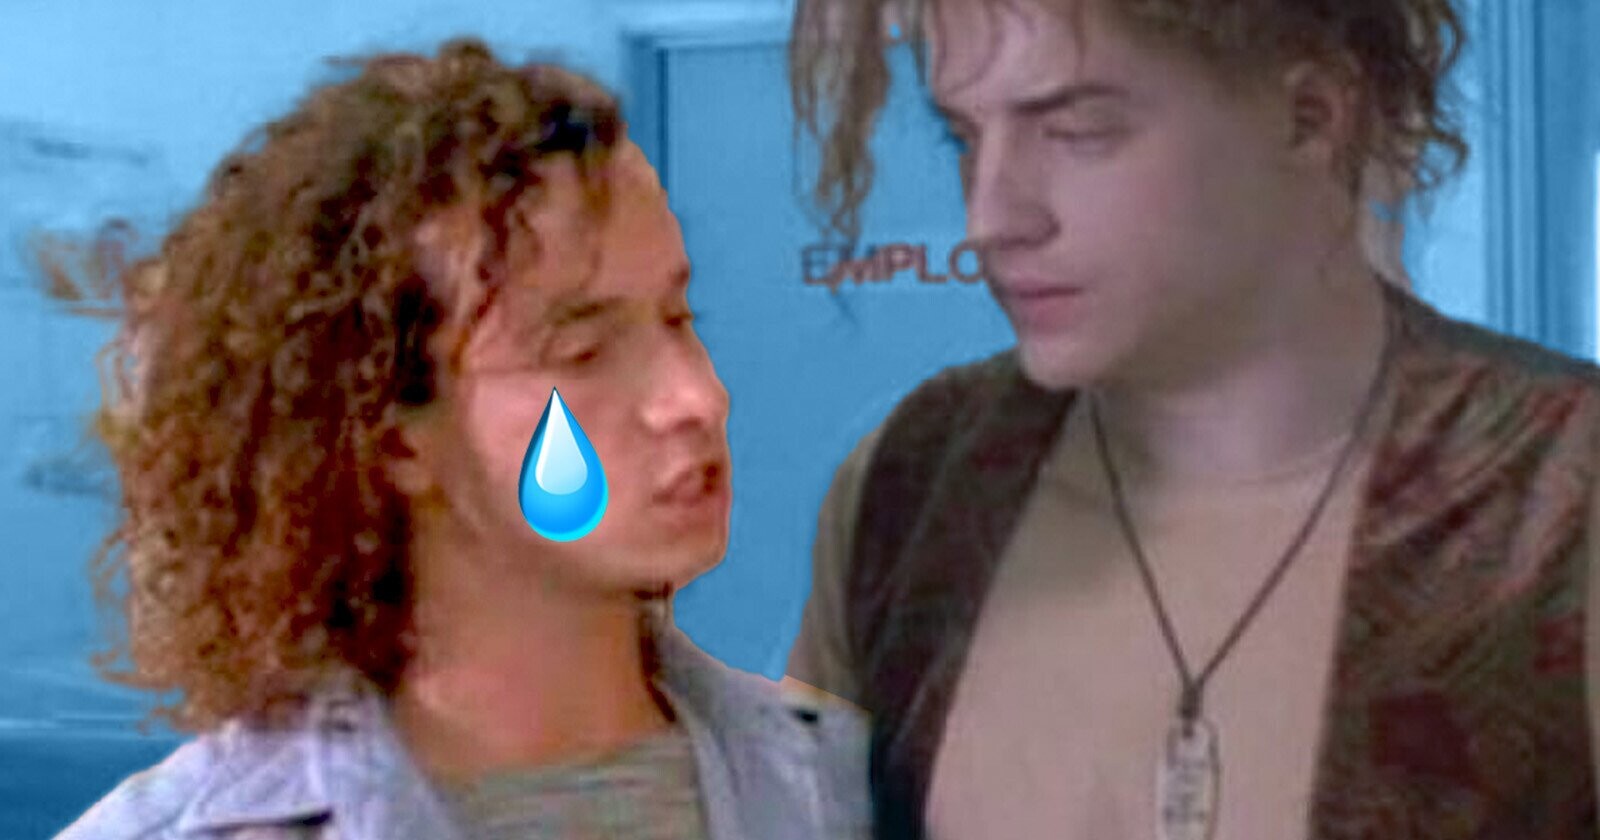 All the ‘Encino Man’ Jokes Are Hurting Pauly Shore’s Feelings